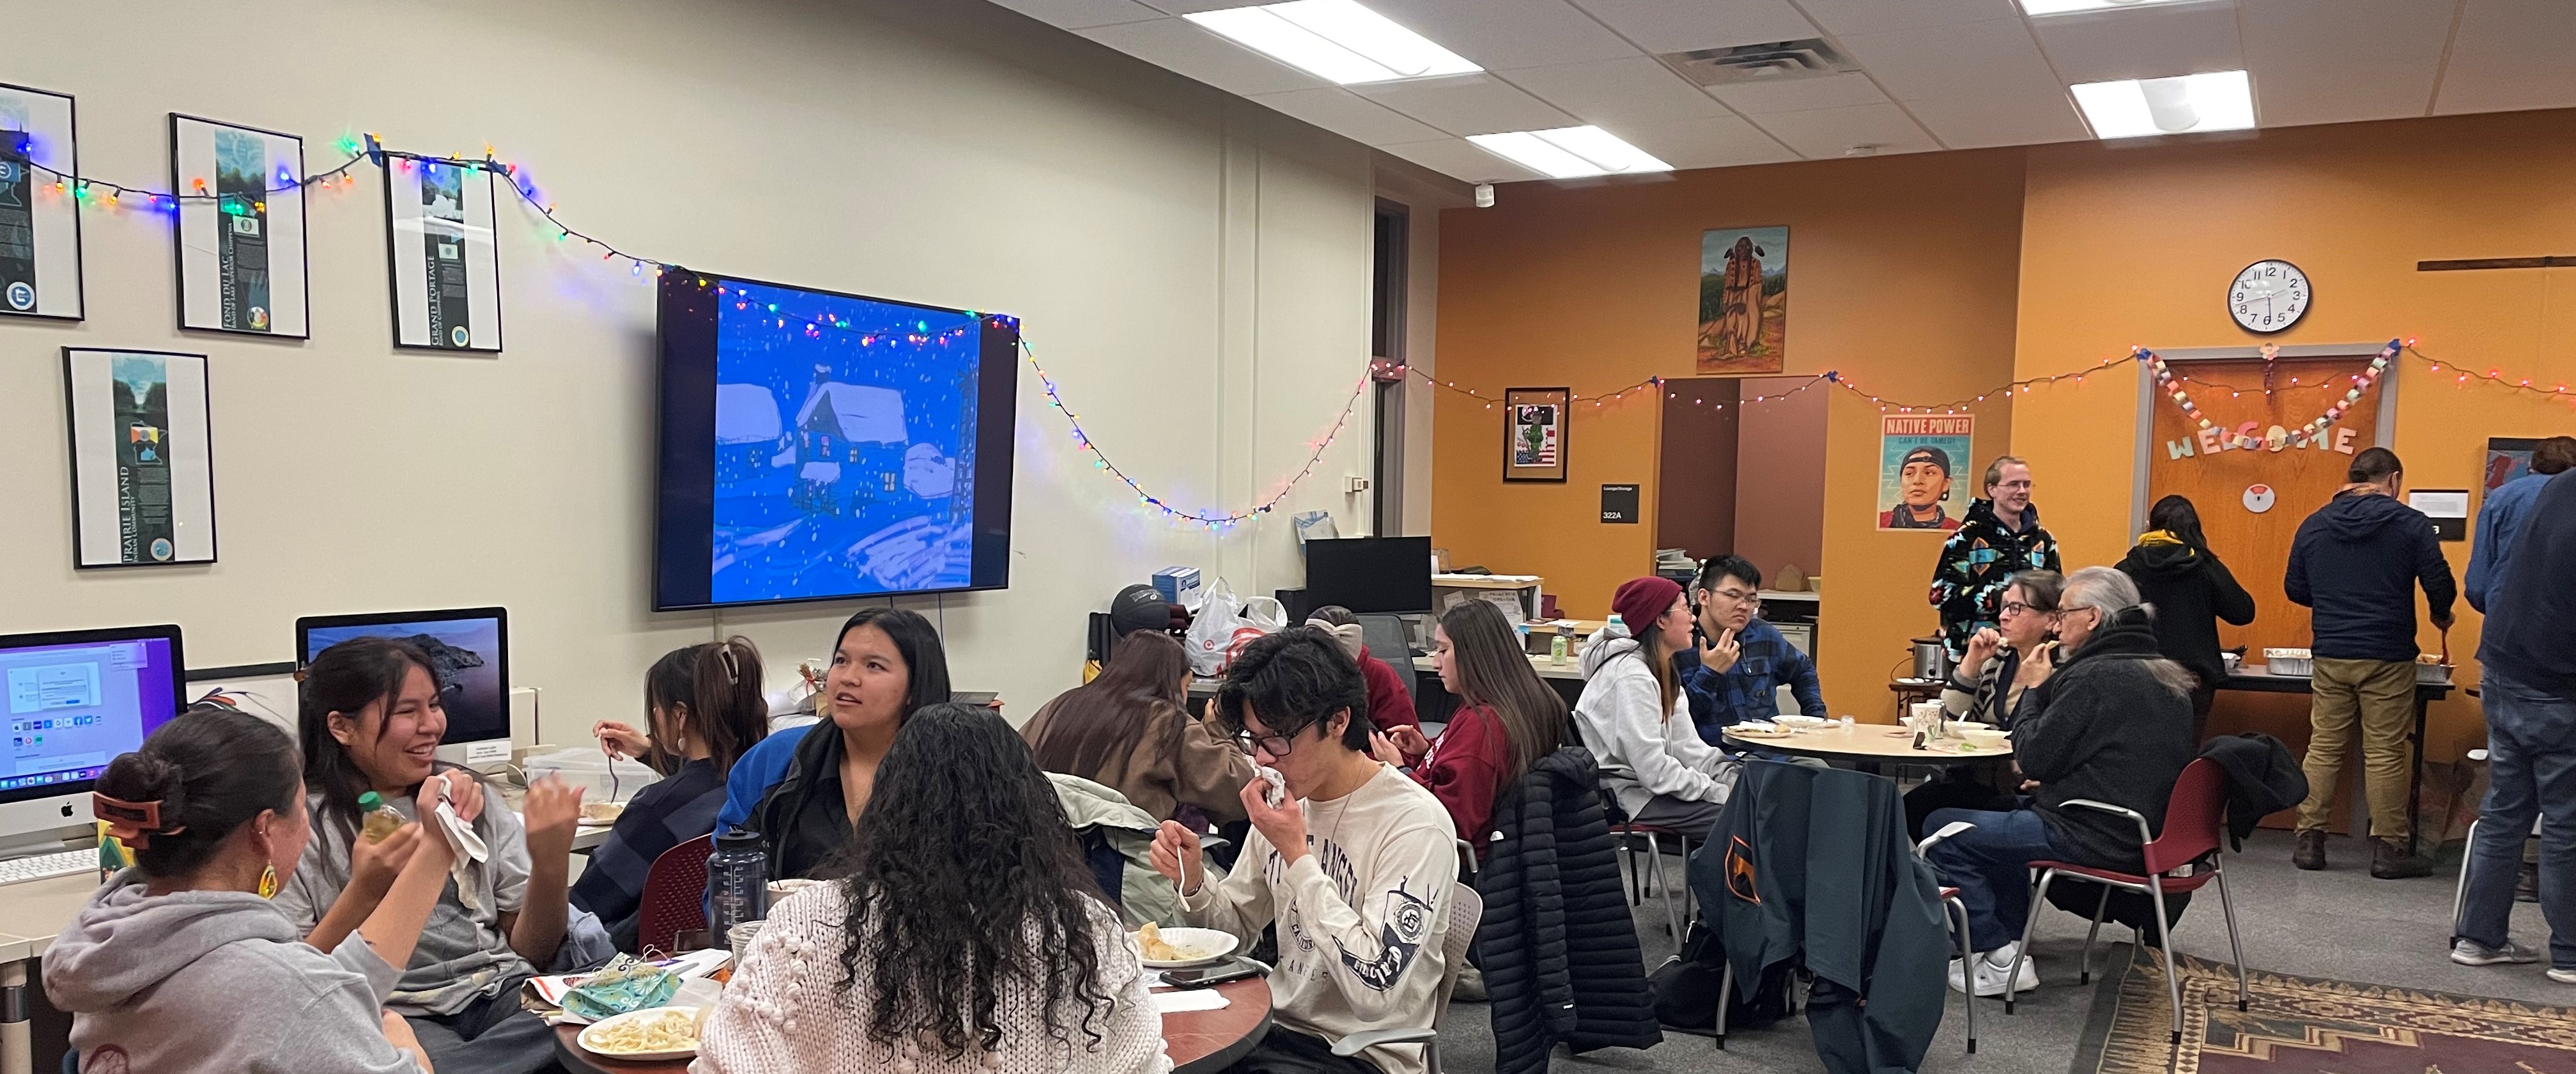 Students and community members gather at the COIN student space during a Winter Community social/gathering event (Winter 2022)